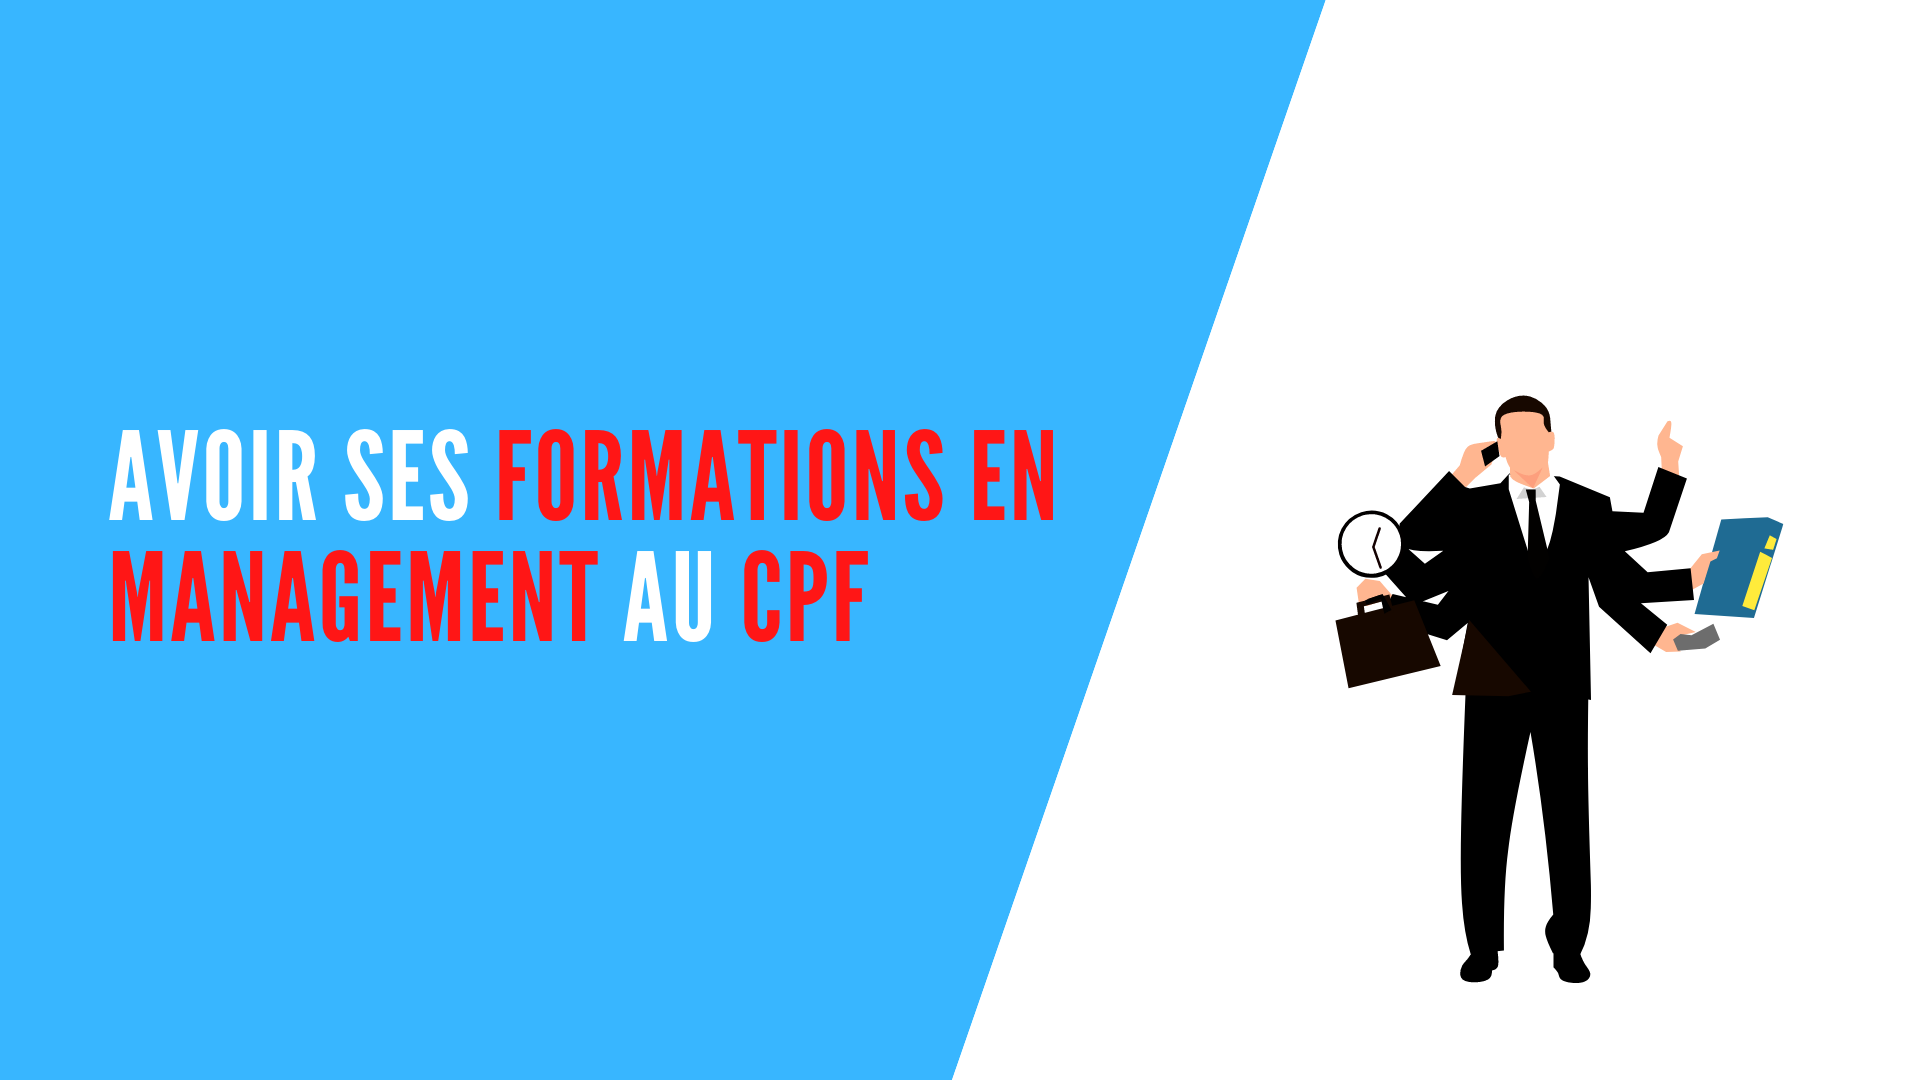 You are currently viewing Avoir ses formations en management au CPF